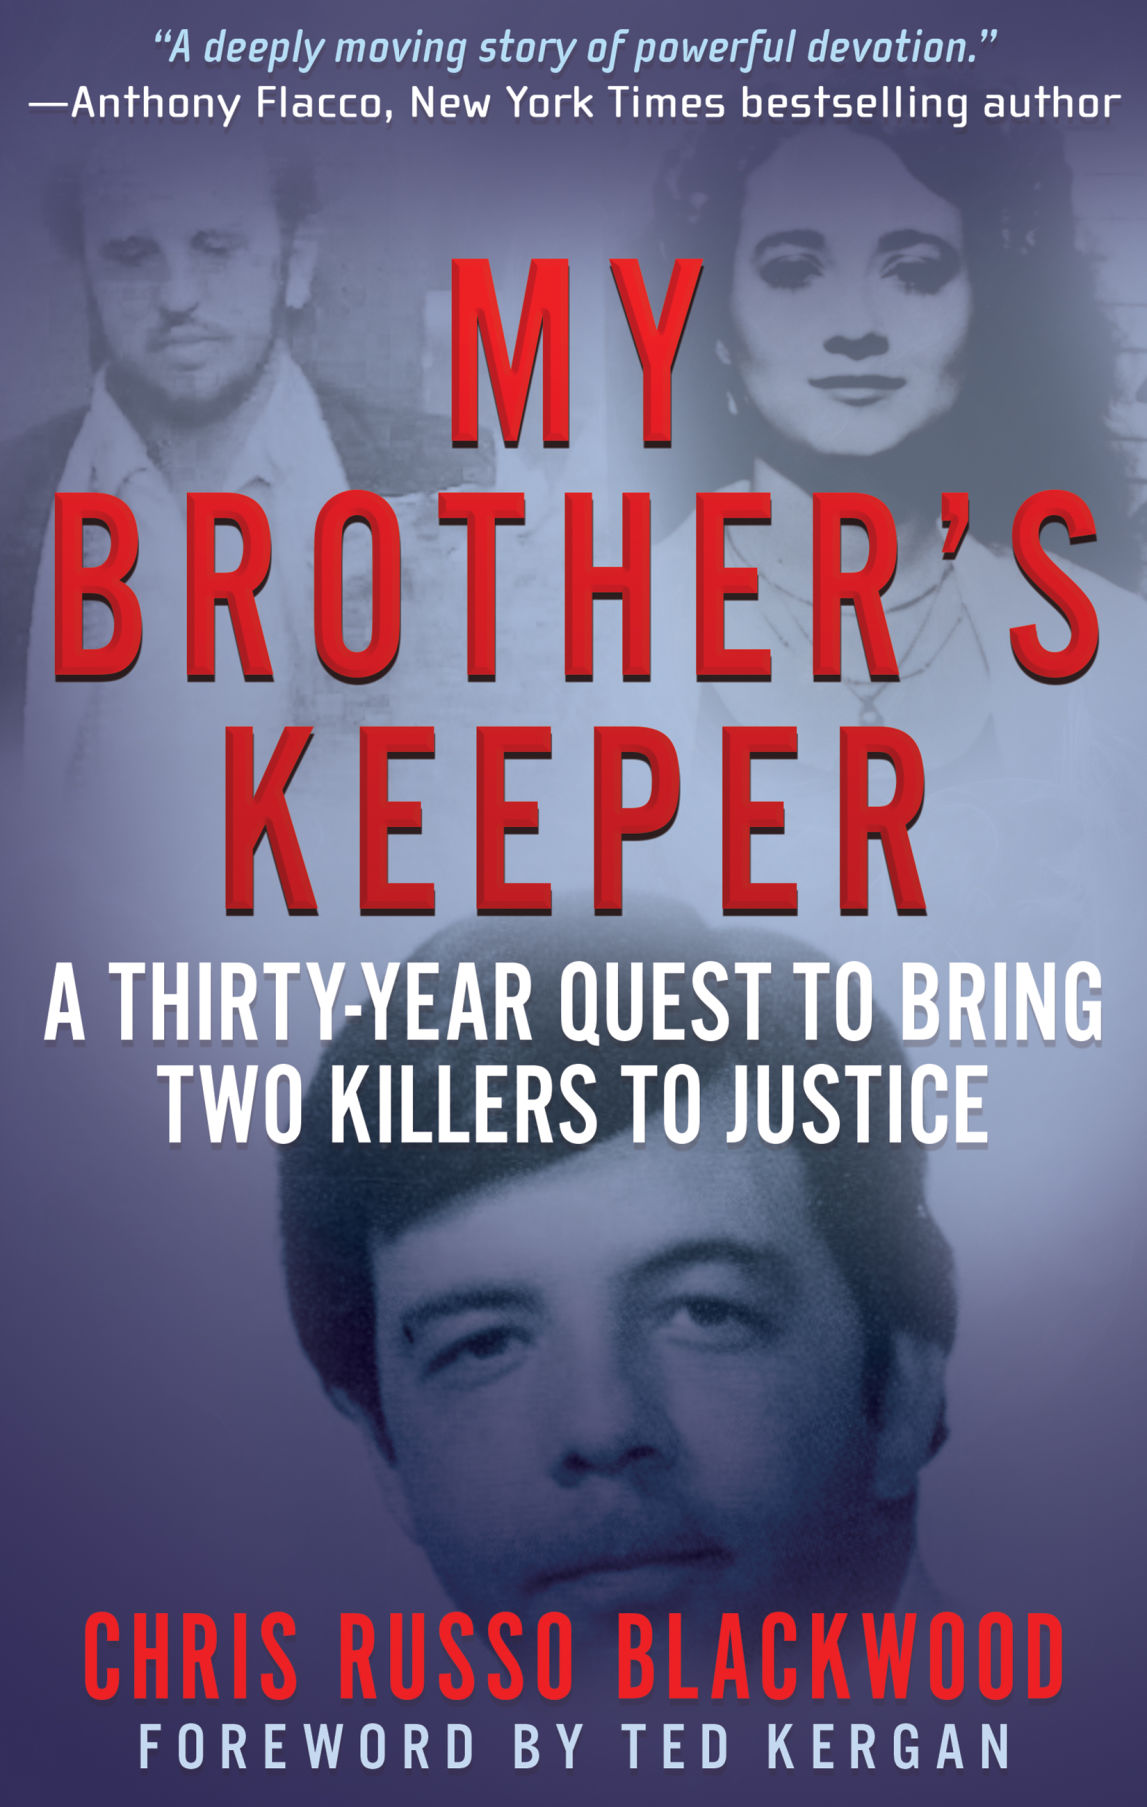 My Brother S Keeper The Story Of How One Man Fought To Bring His Brother S Killers To Justice Entertainment Life Theadvocate Com